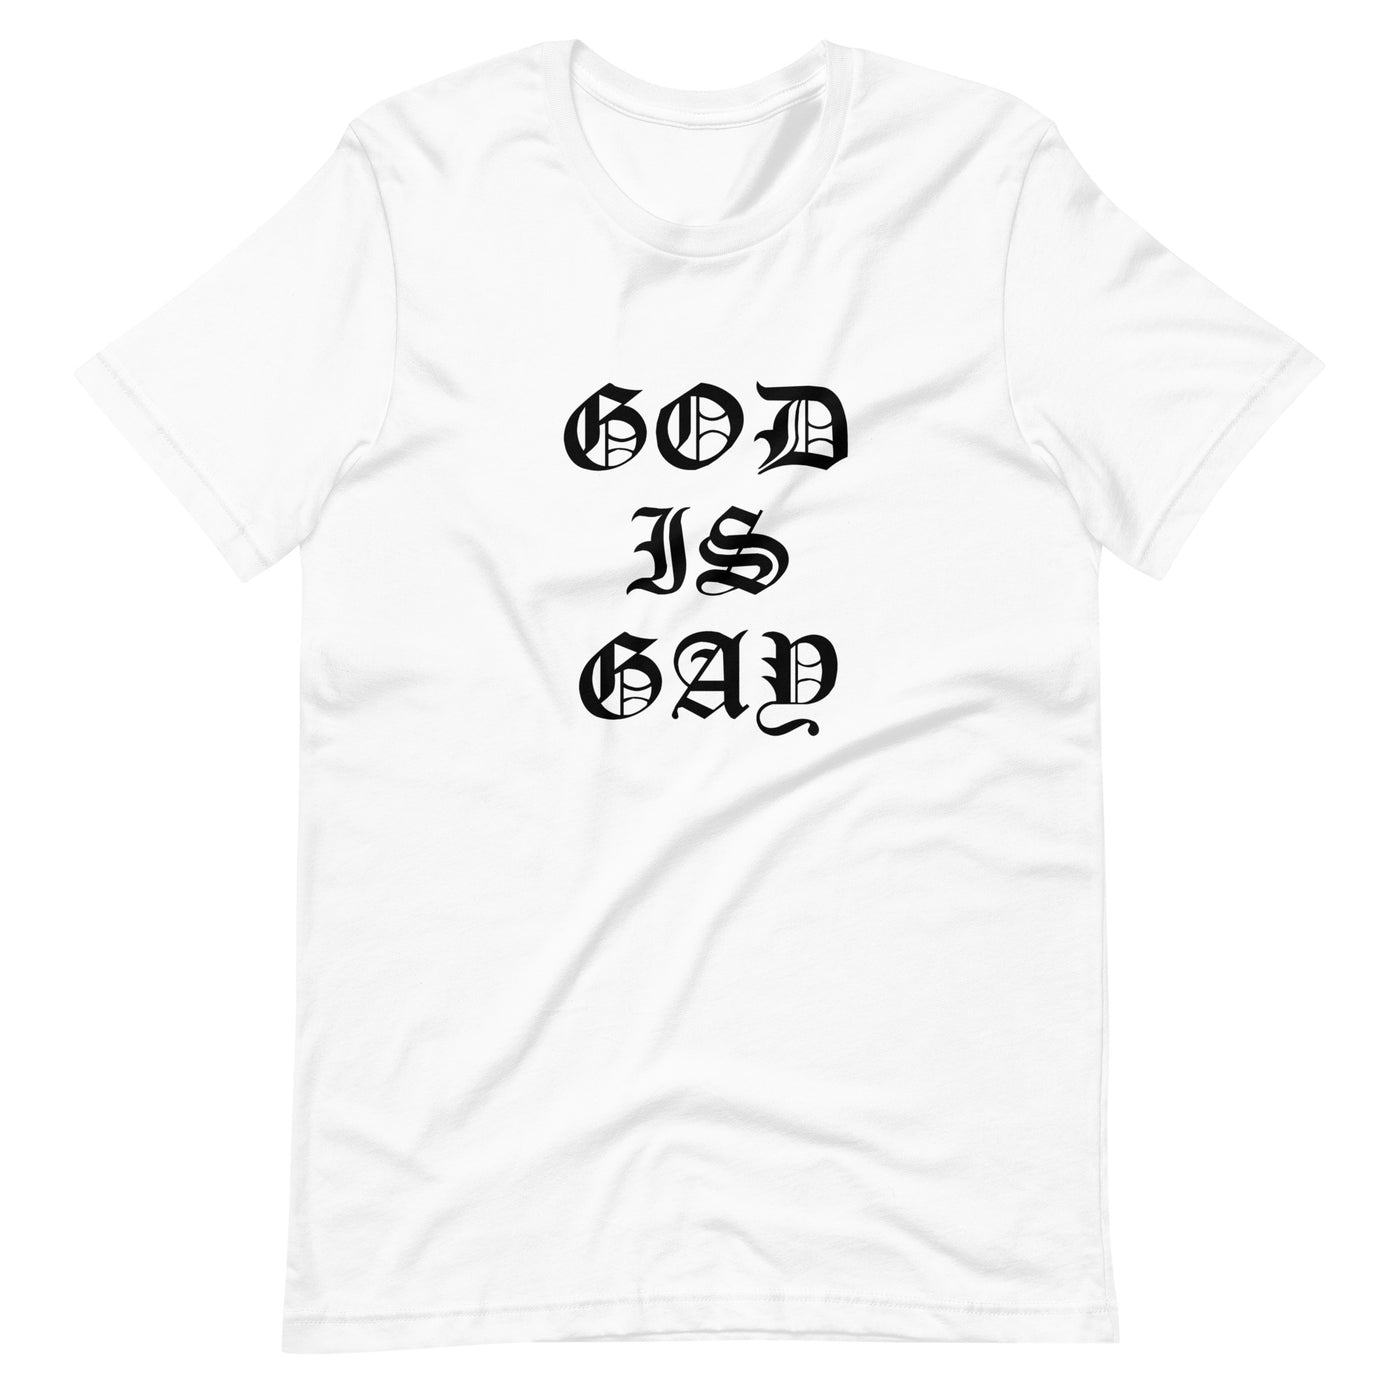 Pride Clothes - Ancient & Powerful Our God Is Gay Pride Merch T-Shirt - White